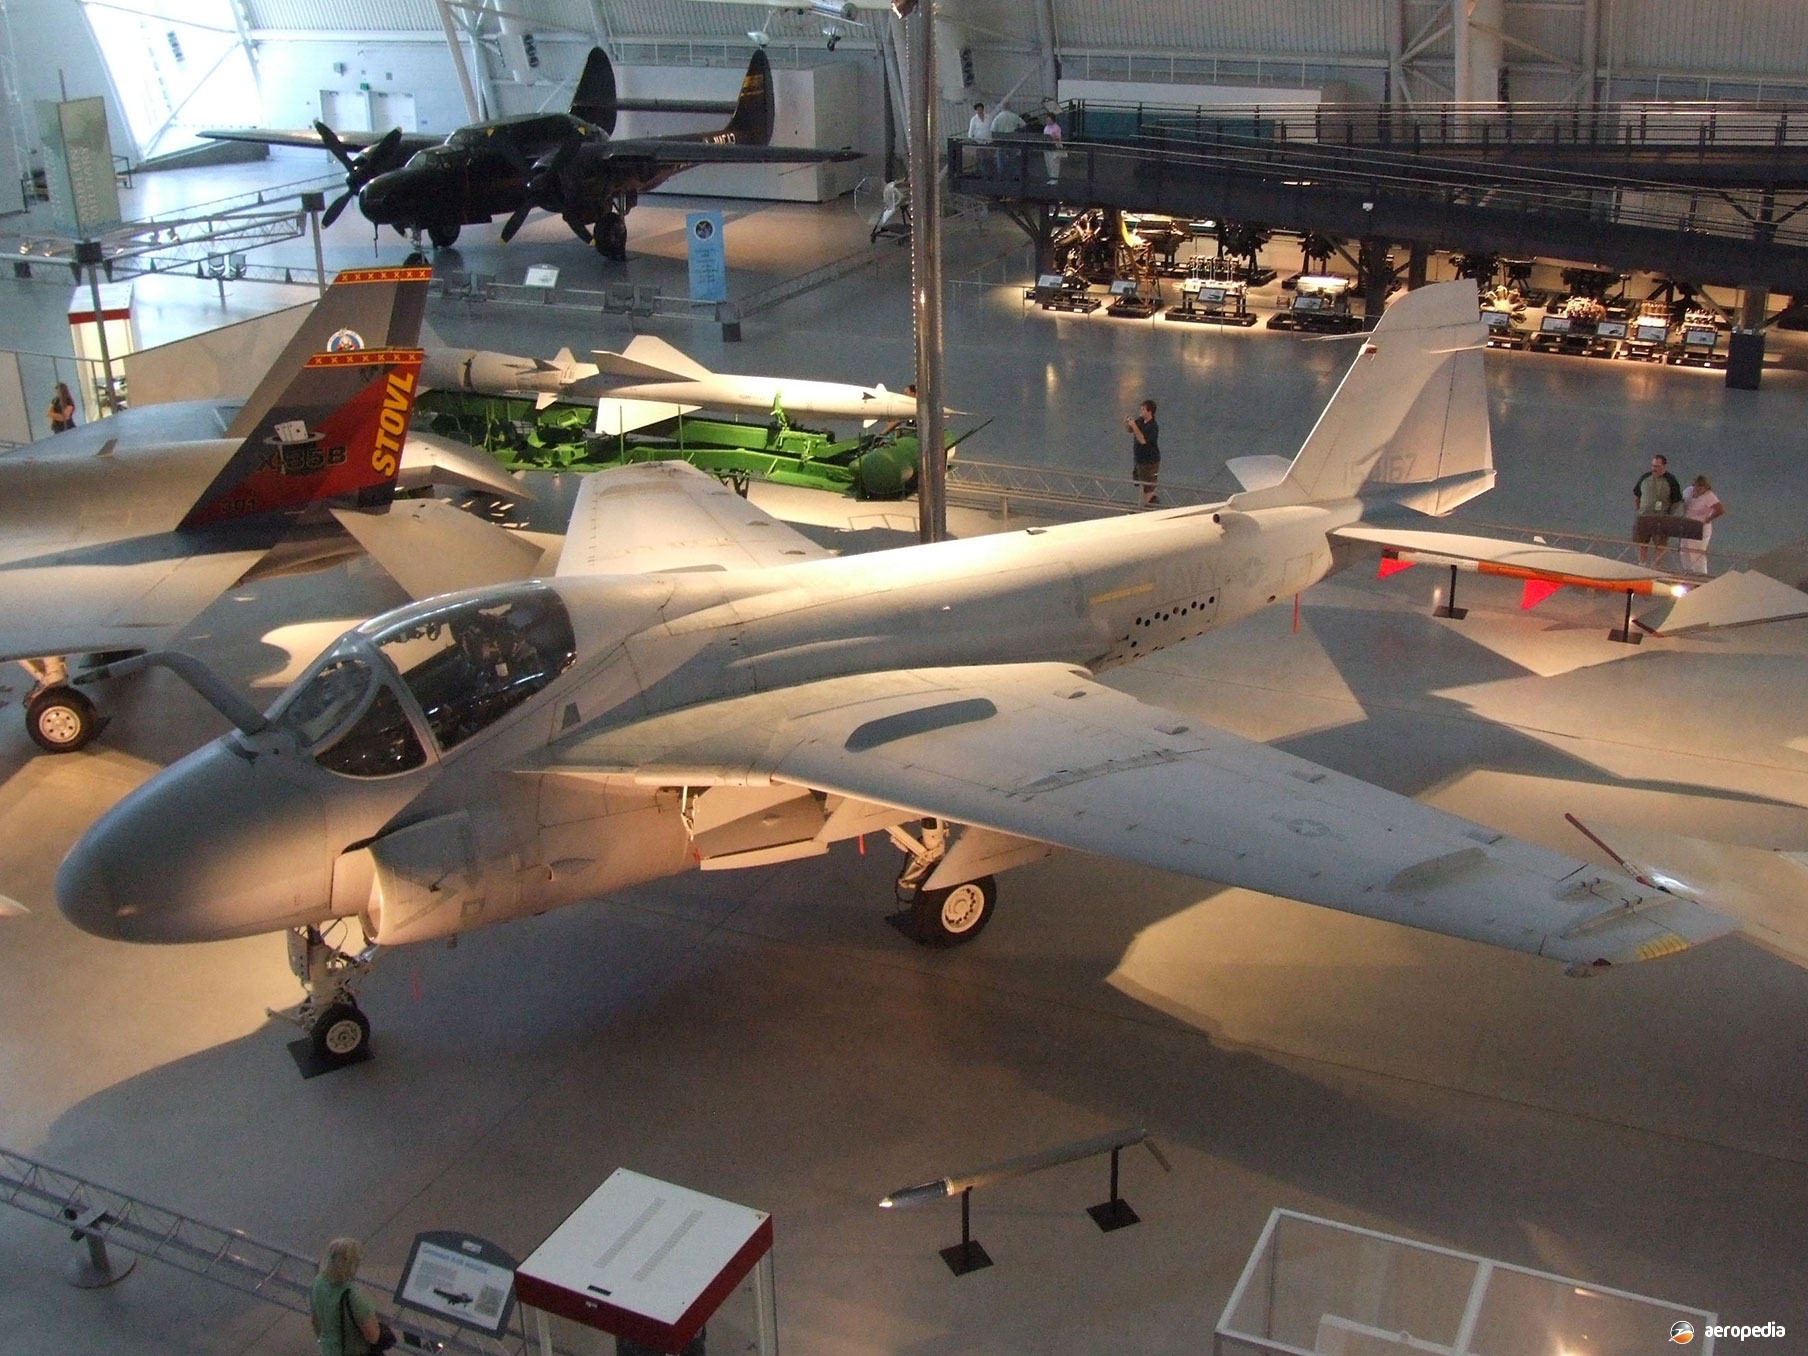 the-a-6-intruder-was-the-us-military-s-aircraft-of-choice-during-the